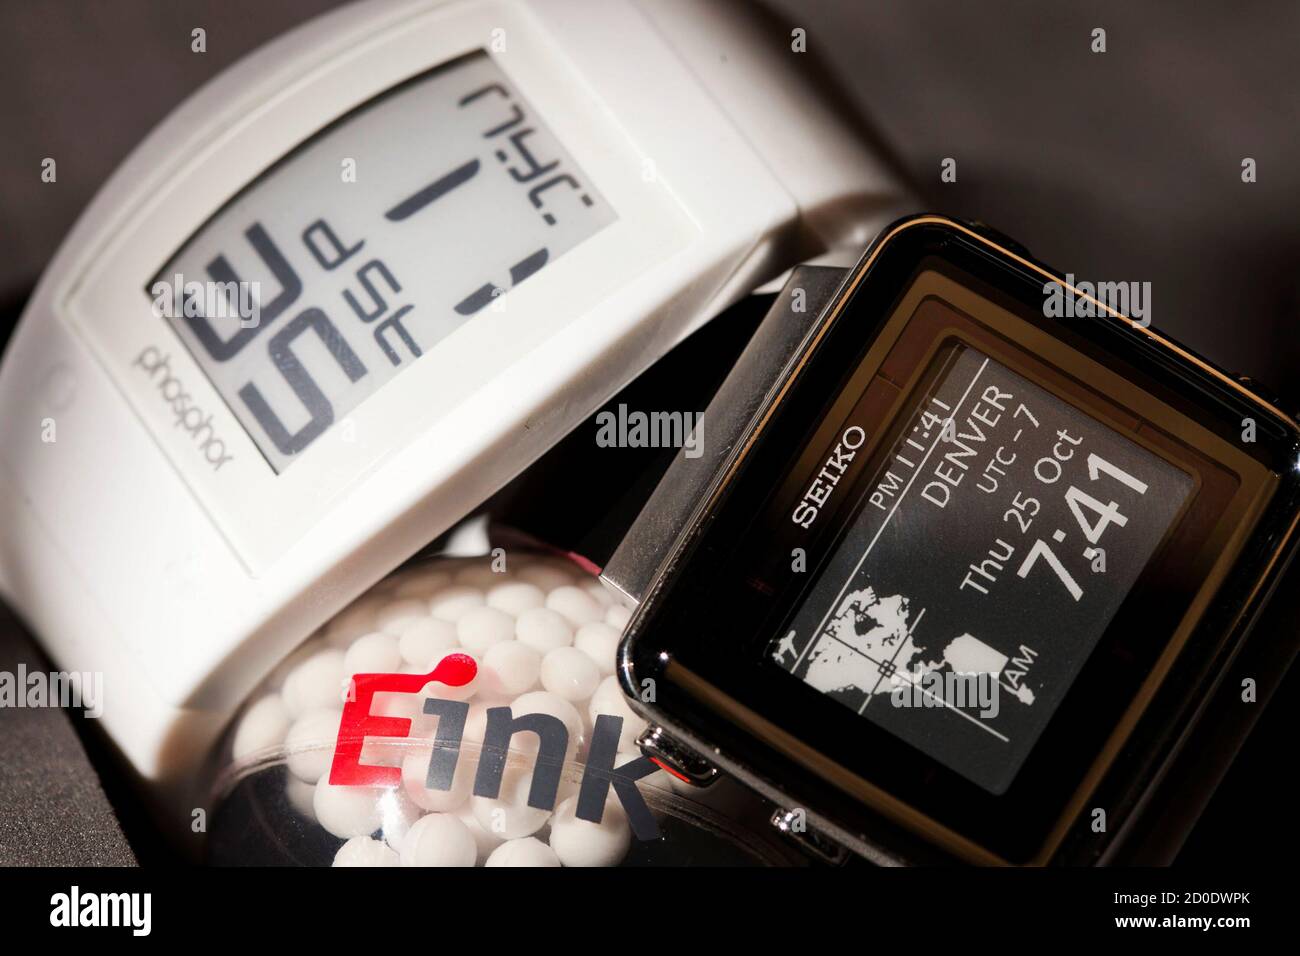 The Phosphor World Time watch, which uses E Ink's segmented display, and  the Seiko Active Matrix EPD watch, which uses active matrix technology  developed by E Ink Corporation, are pictured in Cambridge,